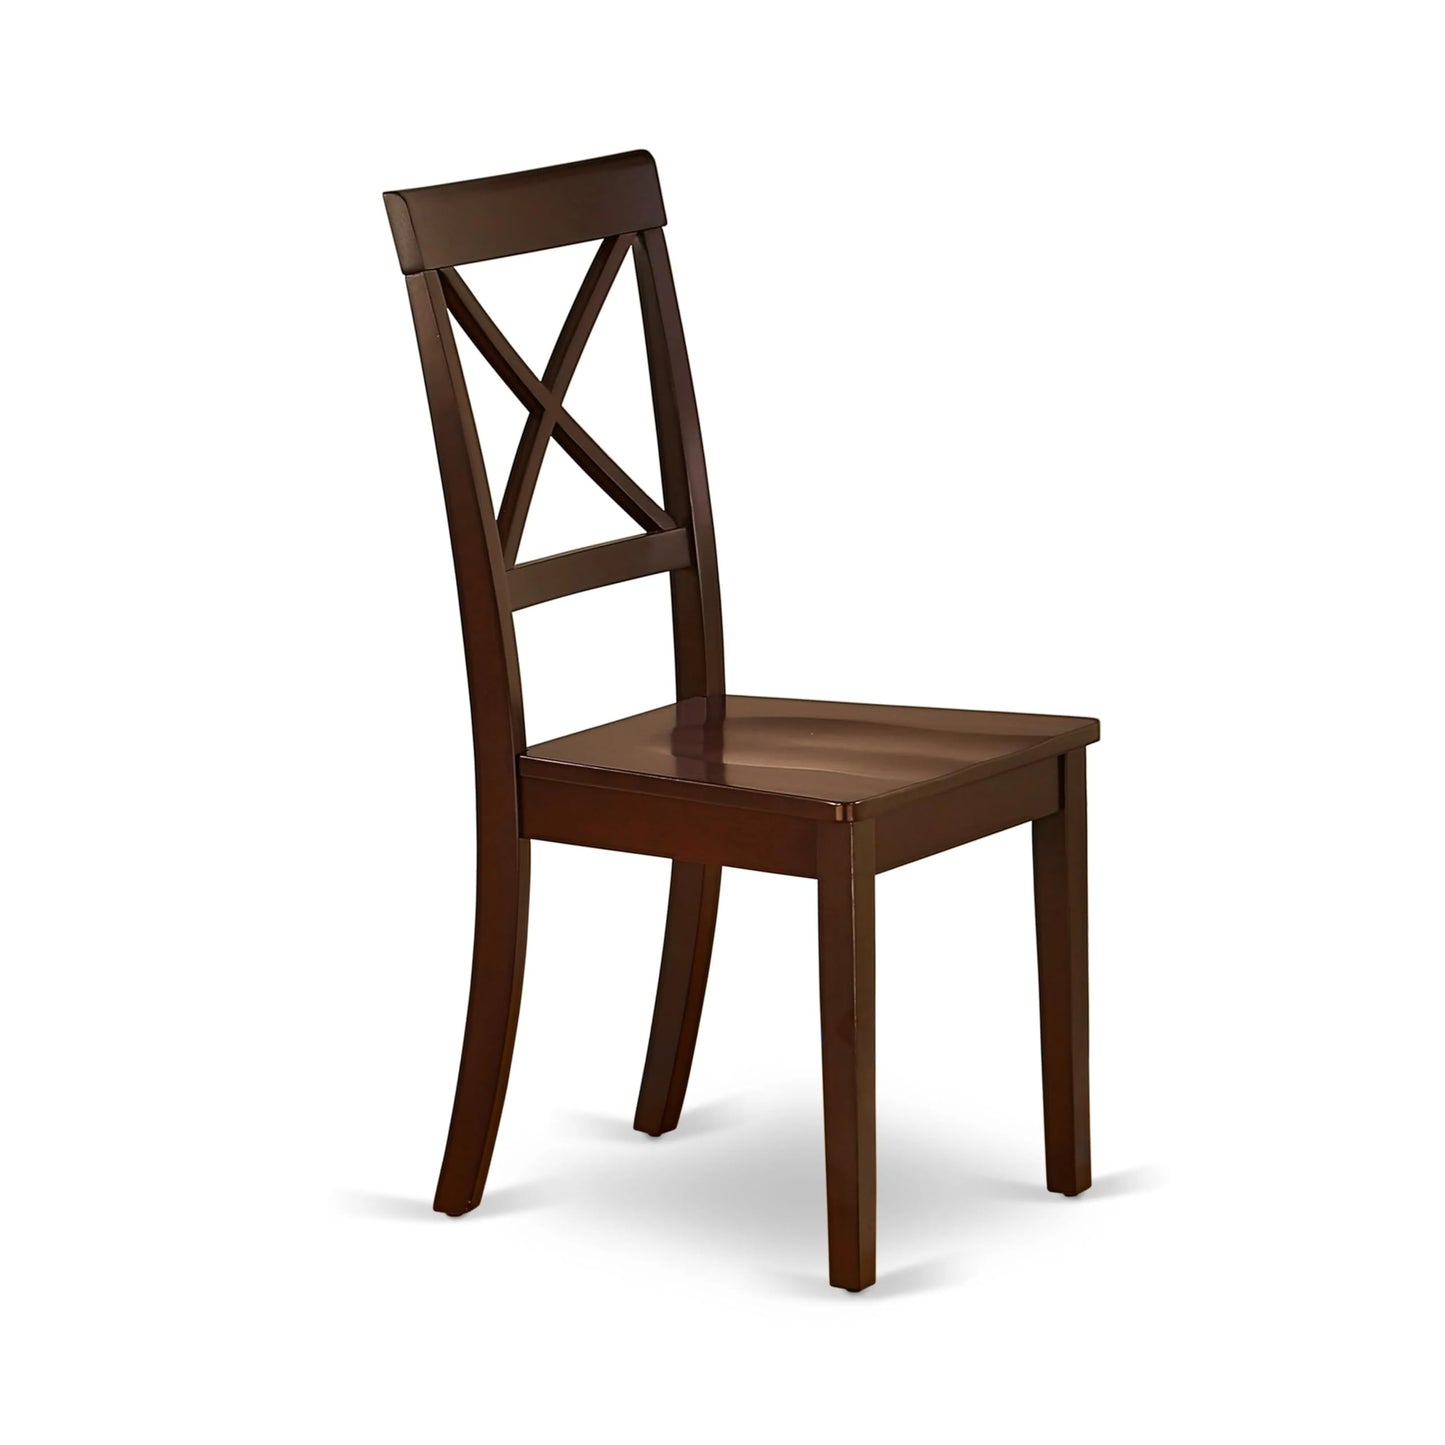 East West Furniture Boston Dining Cross Back Wood Seat Kitchen Chairs, Set of 2, Mahogany